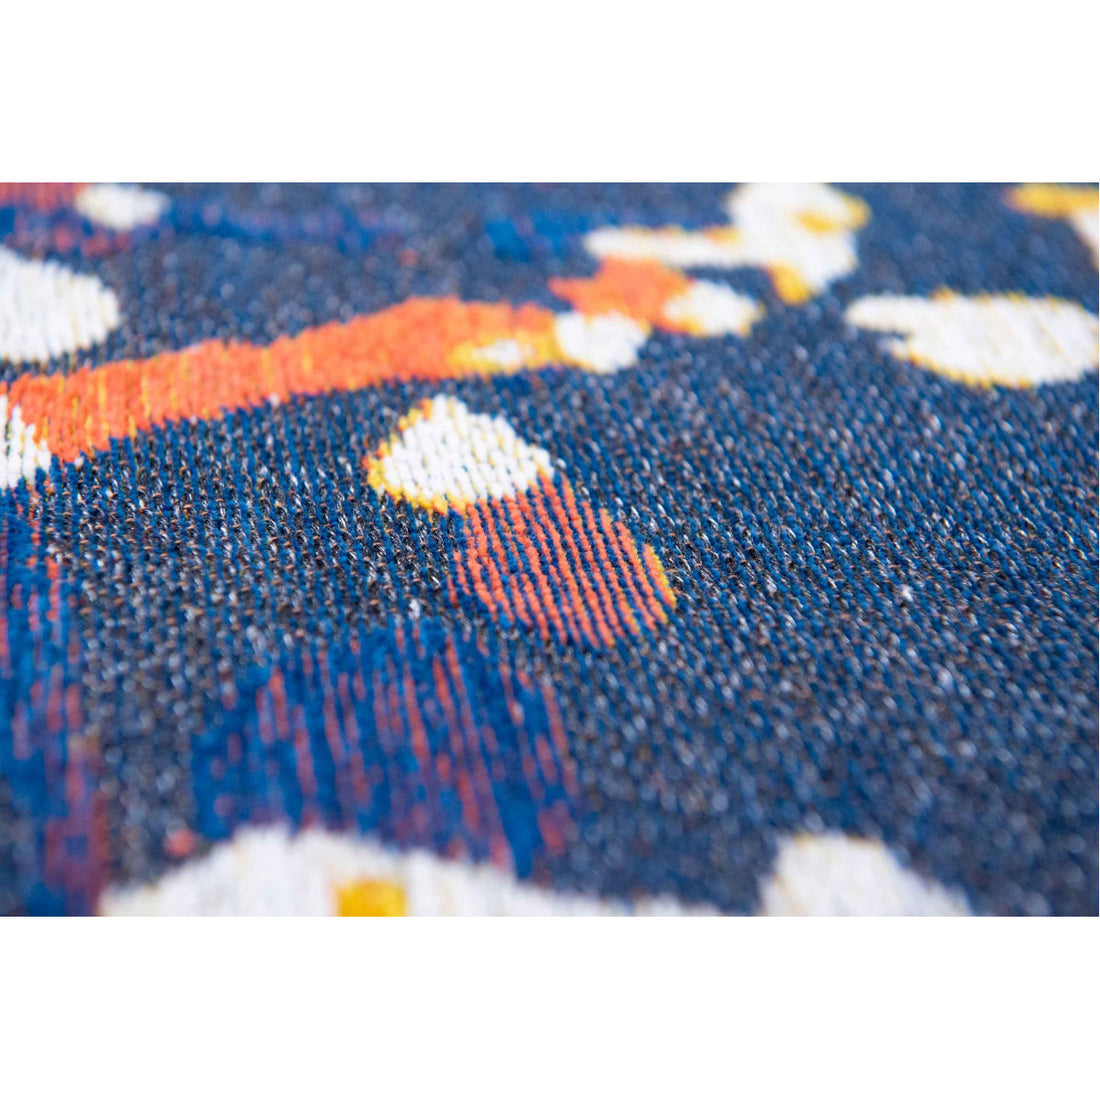 Louis de Poortere Gallery Expression 9220 Abstract Blue Rug